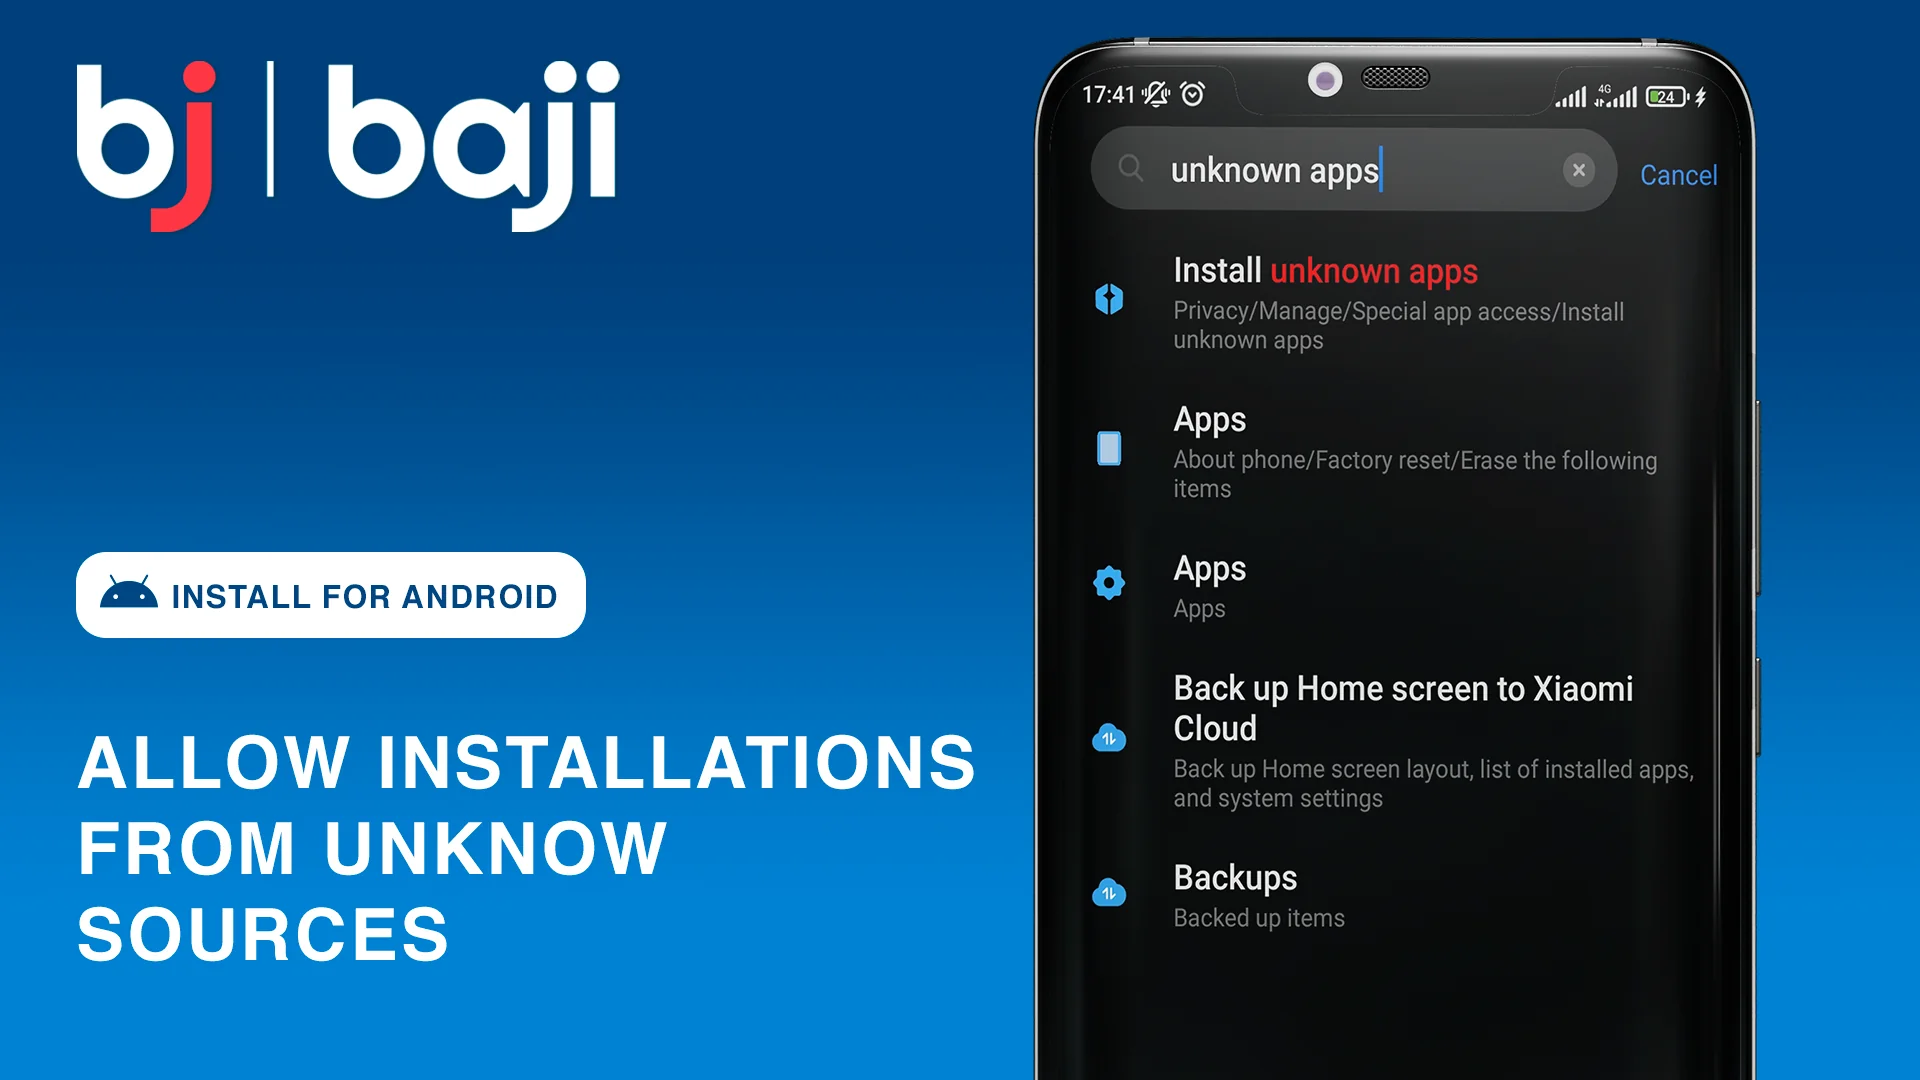 To Install Baji App on Android, allow installations from unknown sources first